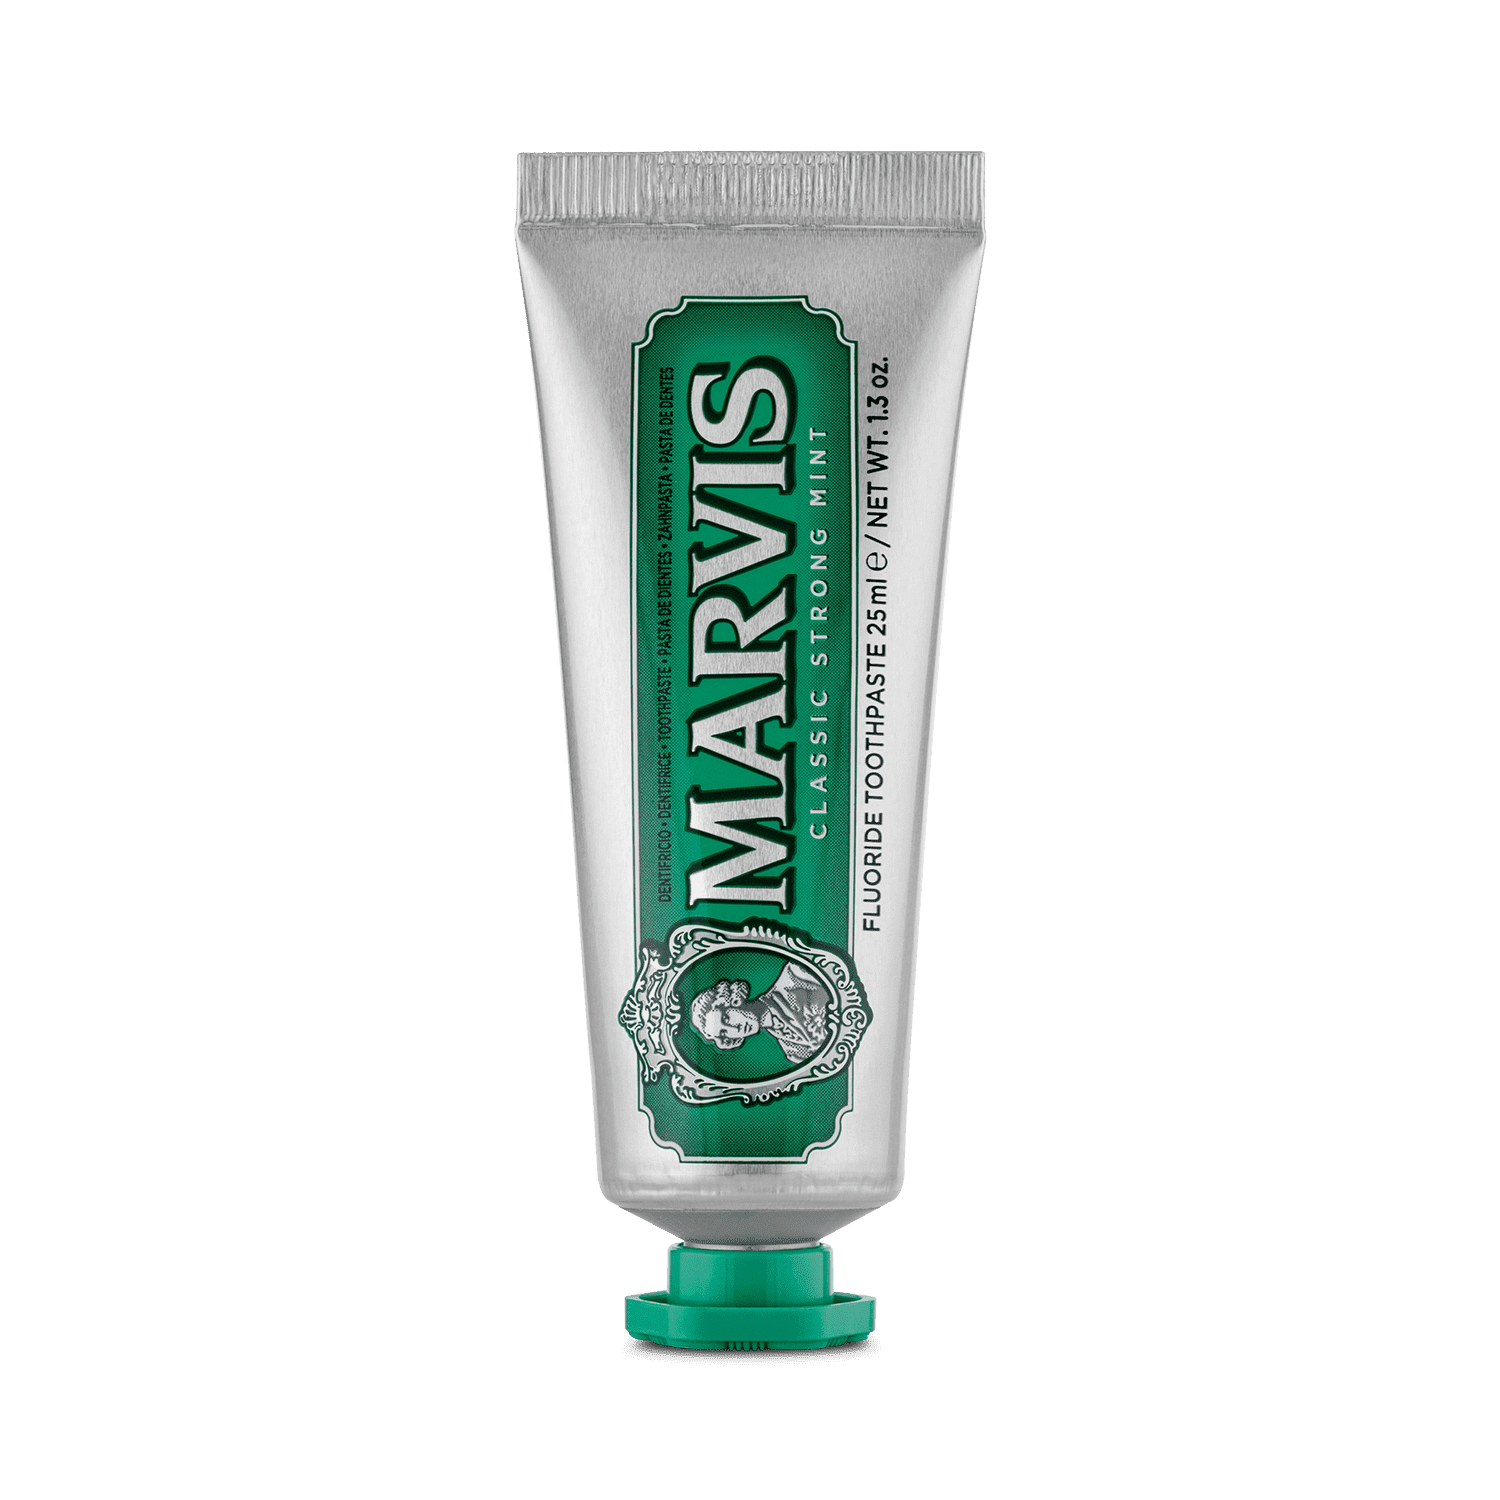 Marvis Classic Strong Mint Toothpaste (25ML)